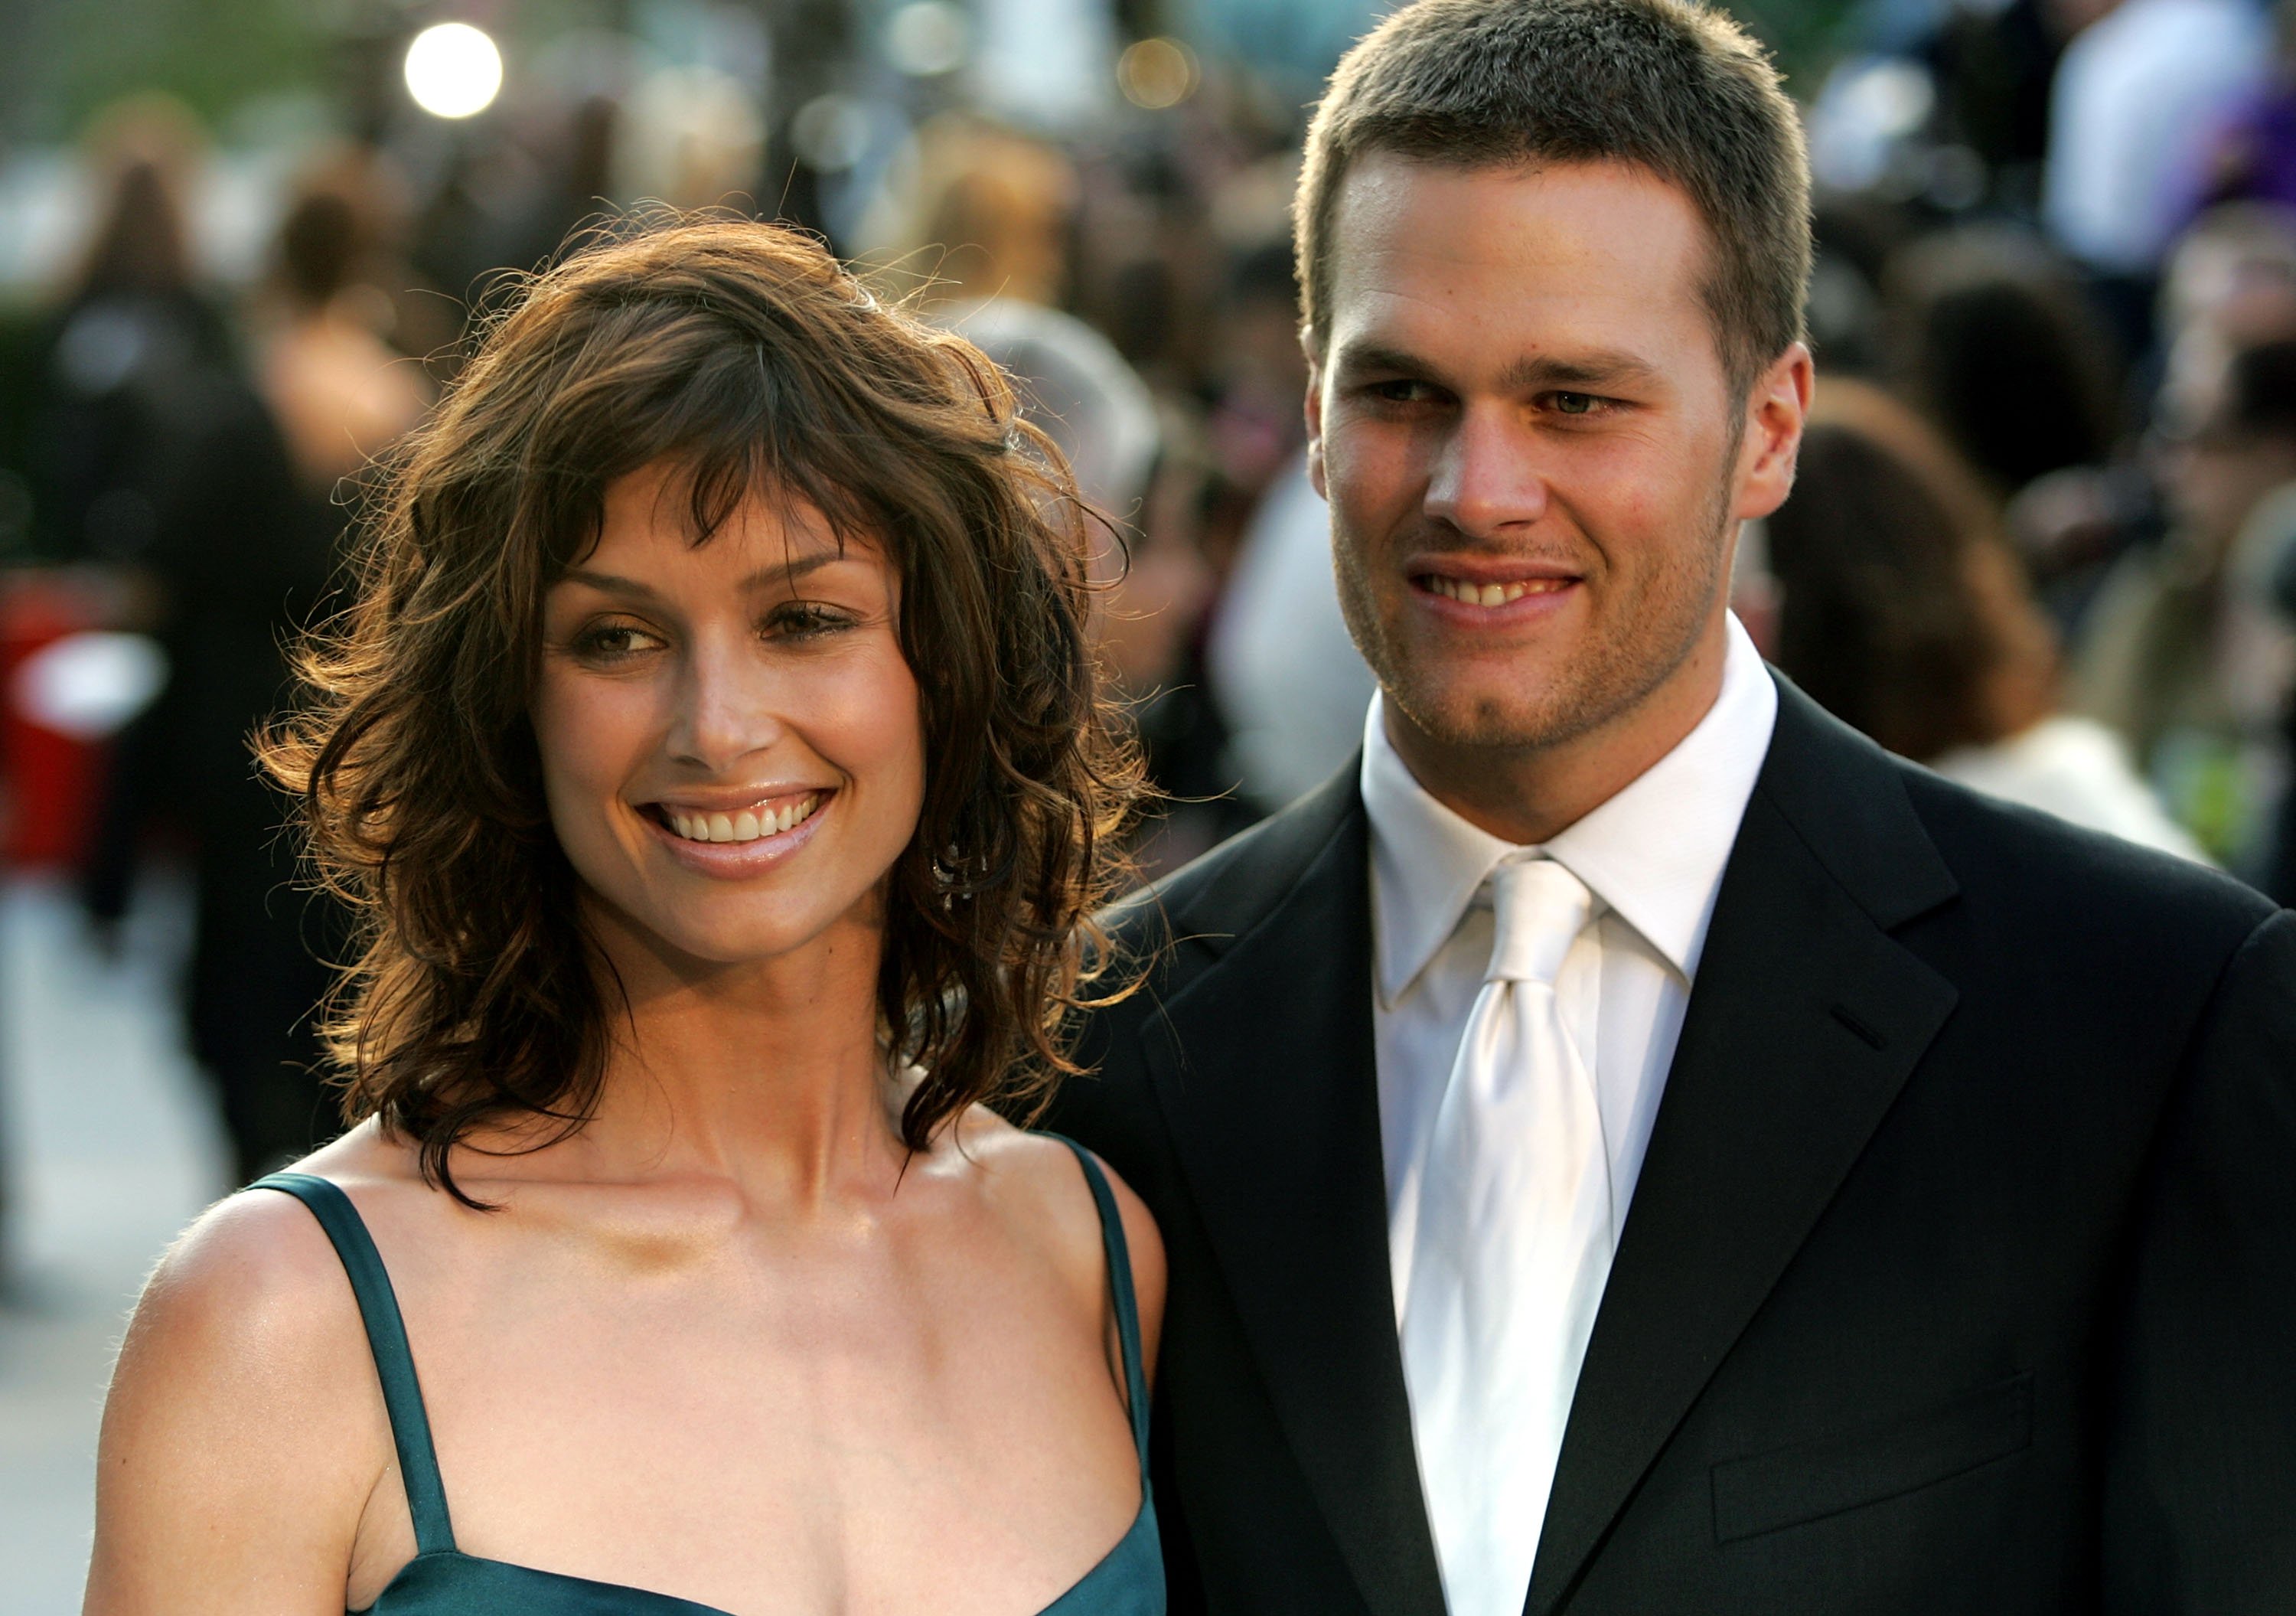 Bridget Moynahan and Tom Brady on February 27, 2005 in West Hollywood, California | Photo: Getty Images